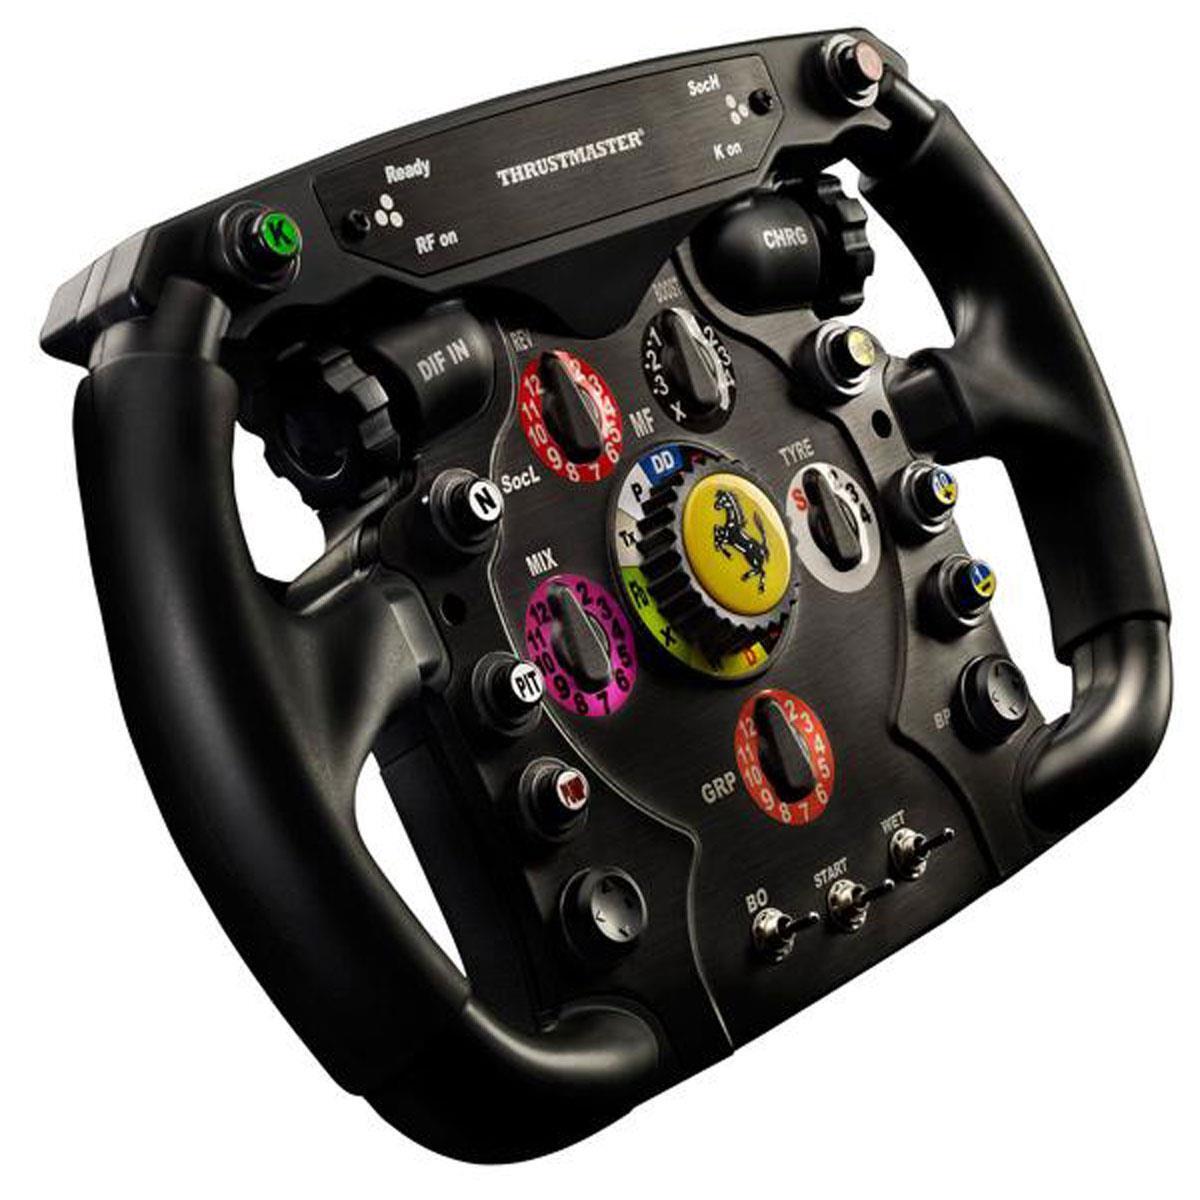 Thrustmaster Ferrari F1 Wheel Add-On for PlayStation 3/4, Xbox One and PC